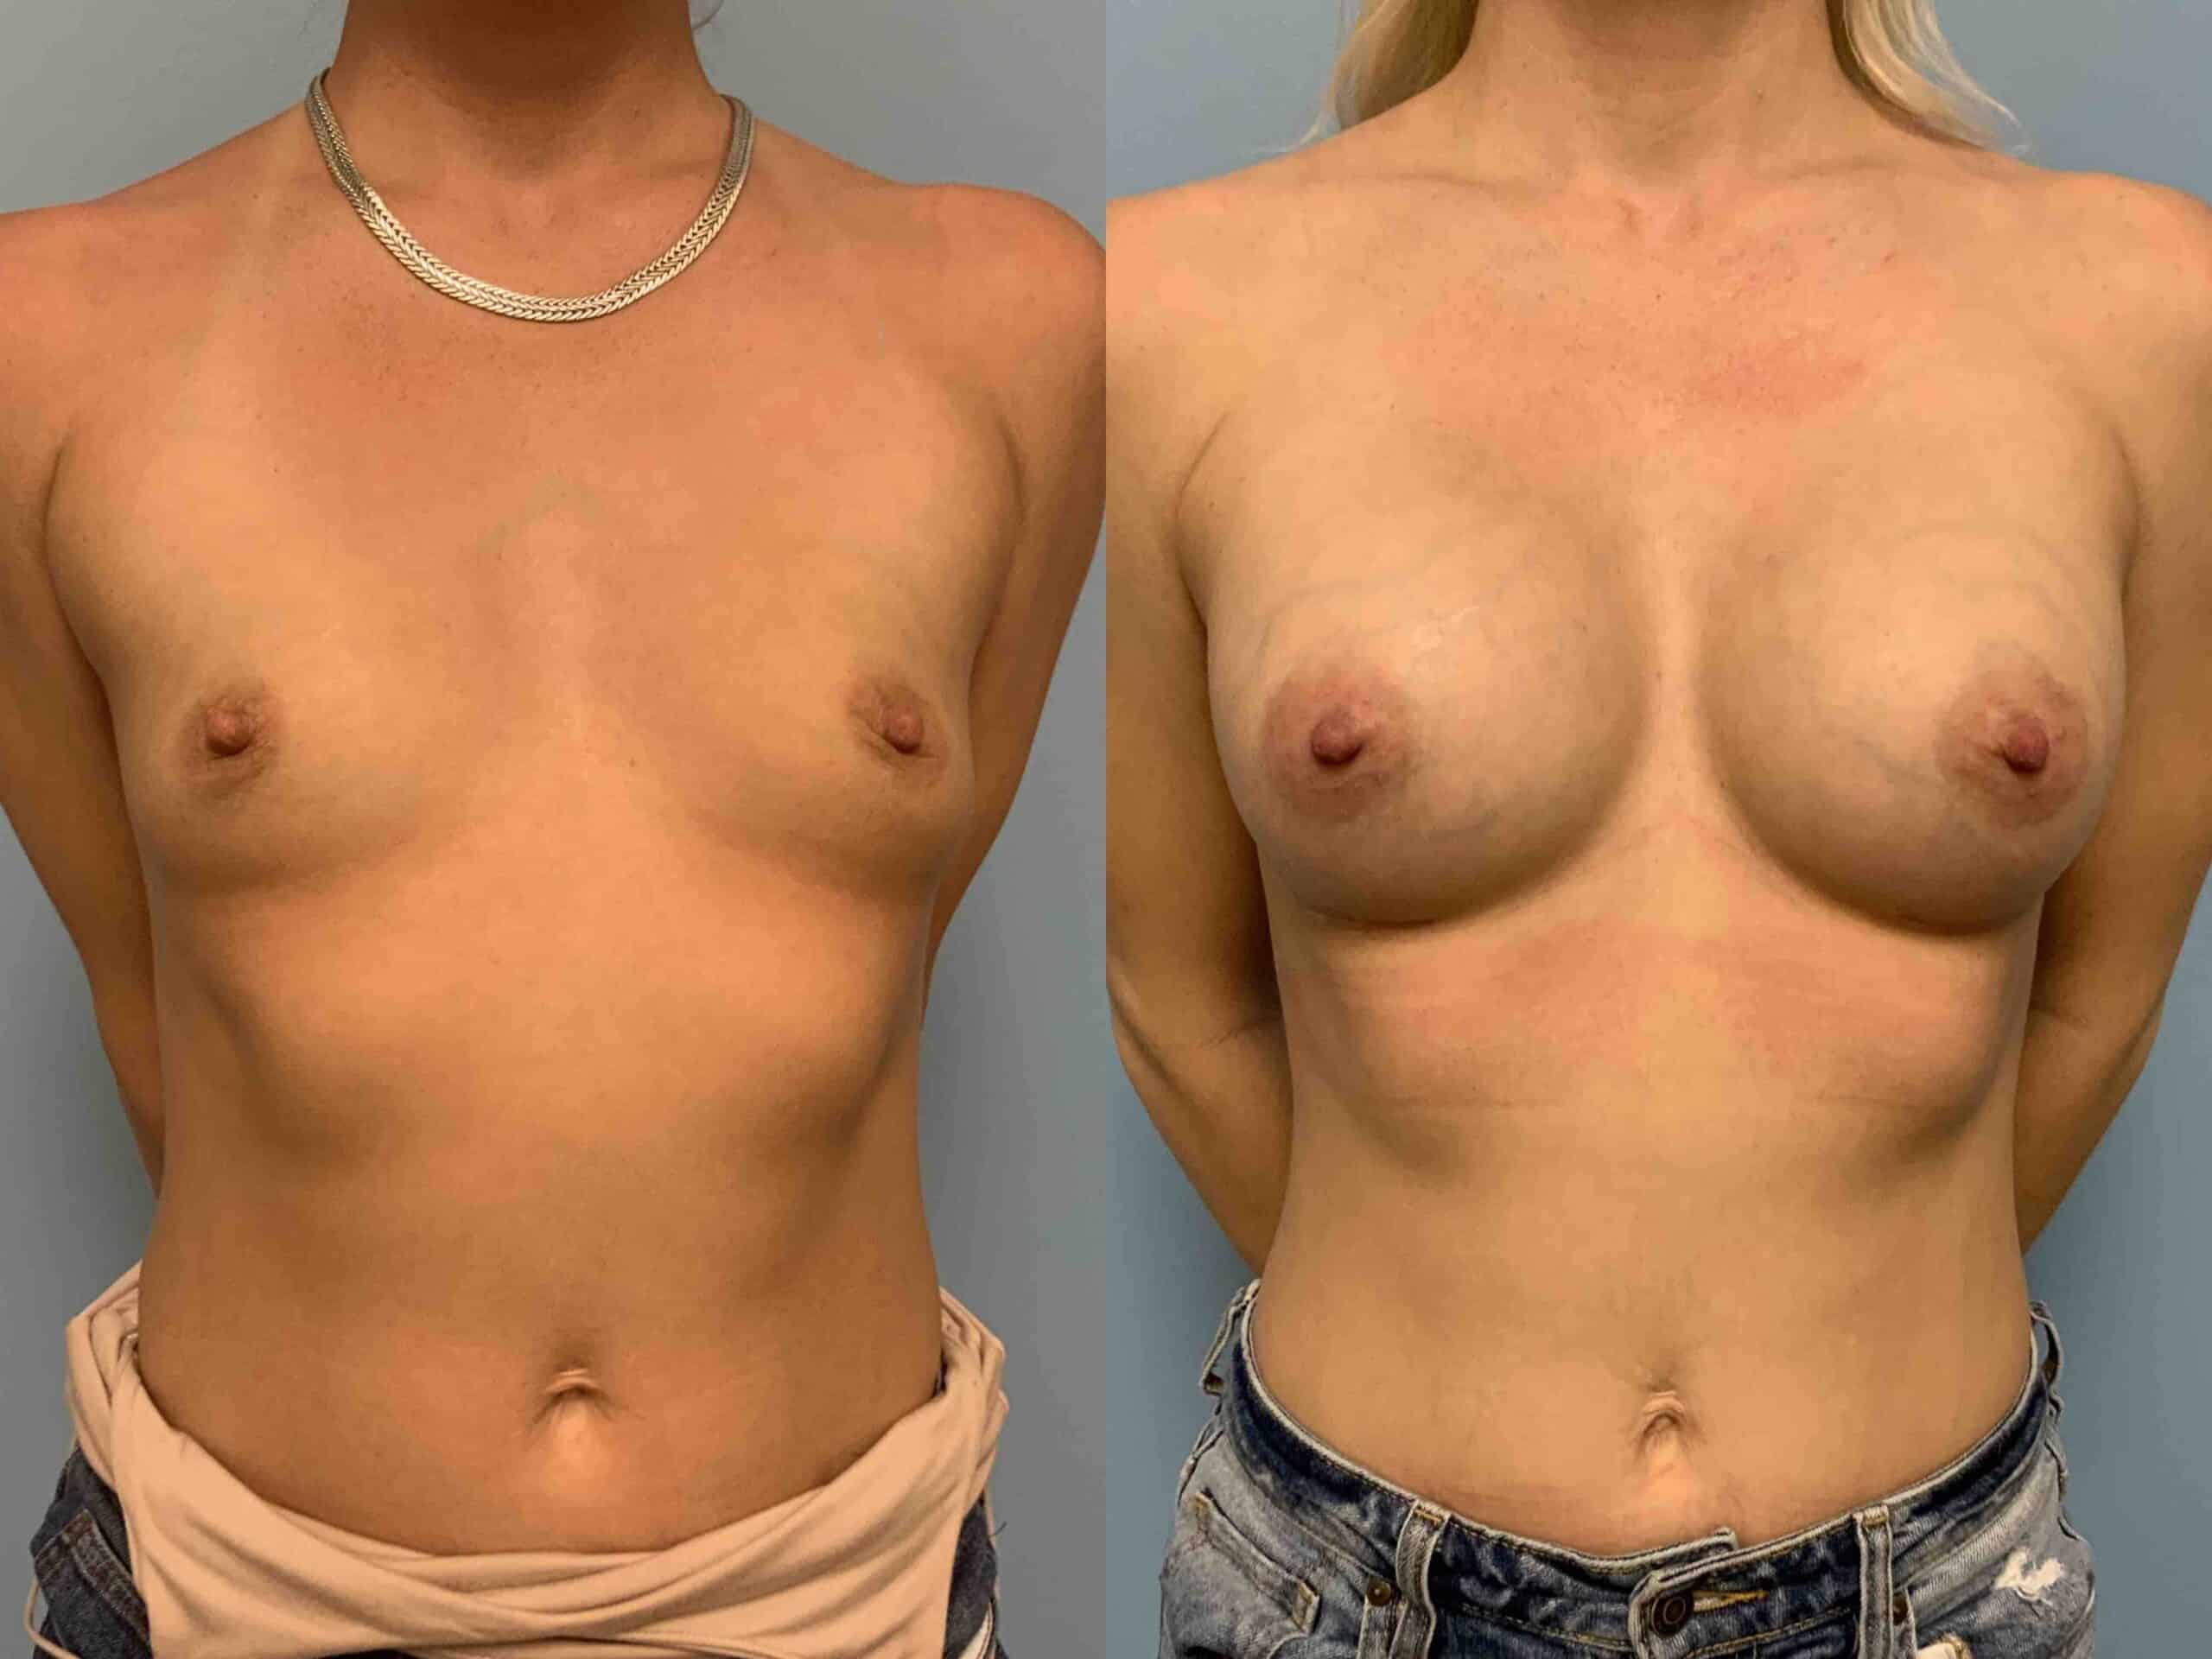 Before and after, patient 2 mo post op from Breast Augmentation, Level III Muscle Release, Strattice Inlay procedures performed by Dr. Paul Vanek